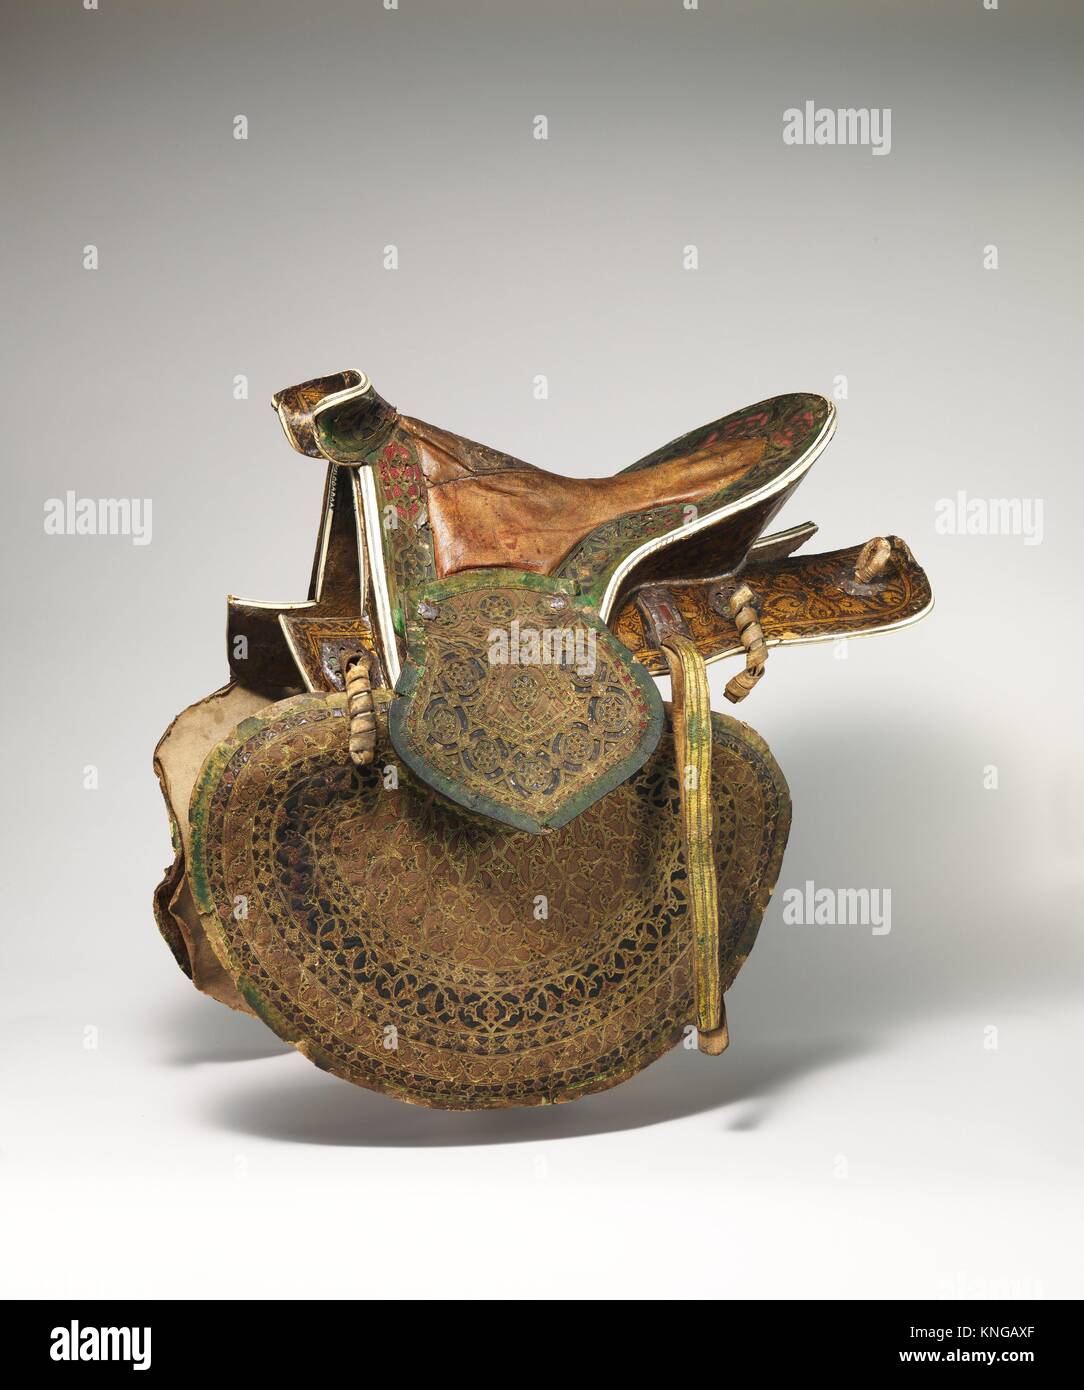 Saddle. Date: late 16th-17th century; Culture: Turkish; Medium: Wood, bone (staghorn), bark, leather, textile, iron, pigment; Dimensions: H. 22 3/4 Stock Photo